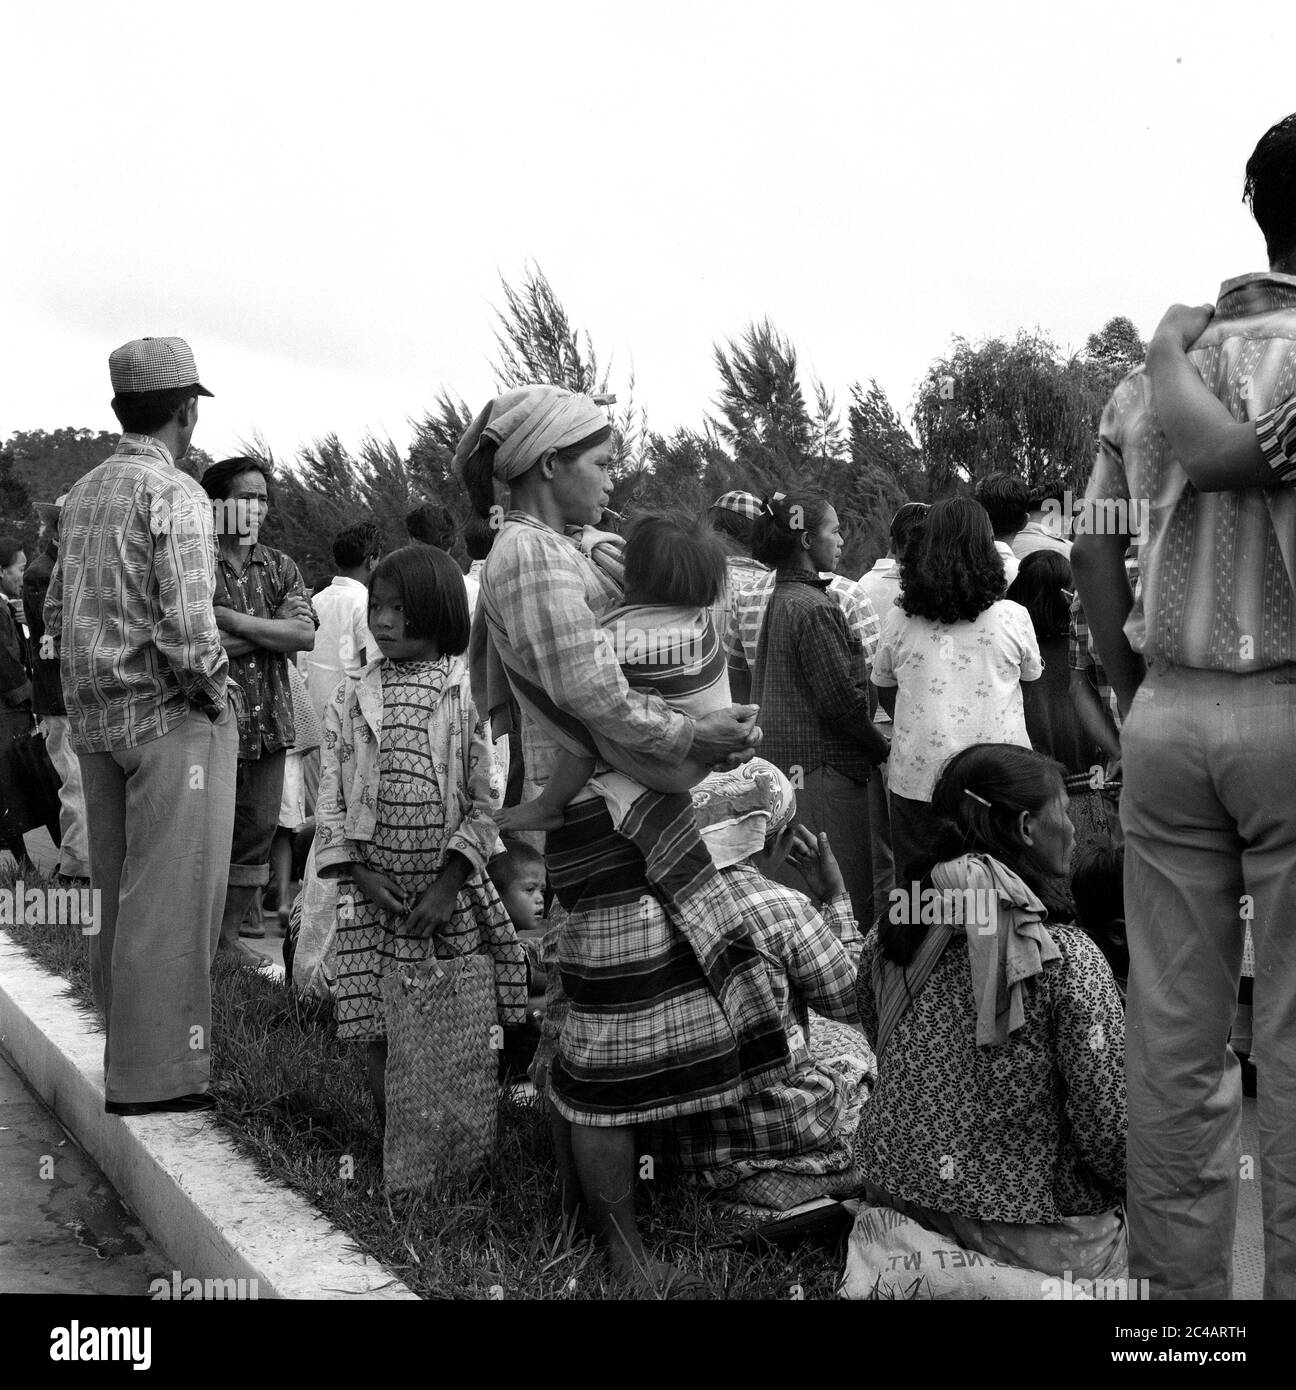 Crowd of people waiting for a bus 1959 People Street Scene, Baguio City The Philippines with mother smoking a cheroot in holder while holding child. Stock Photo